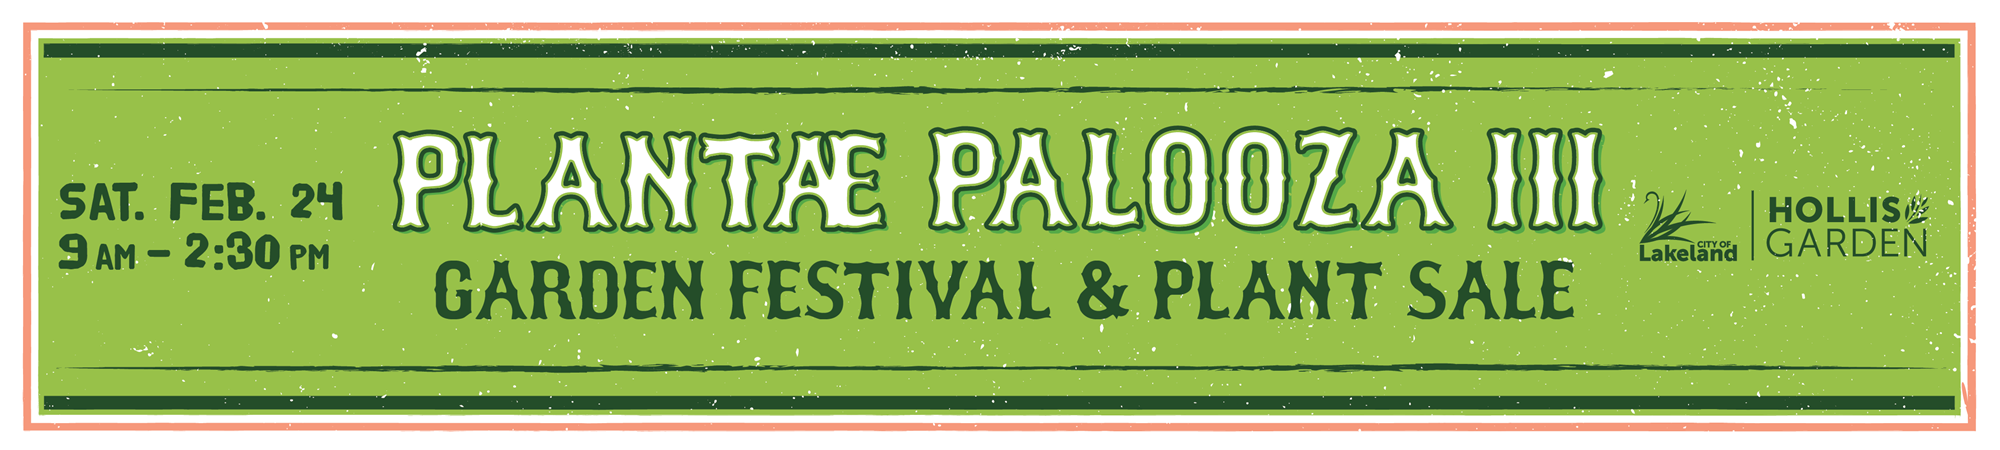 Plantae palooza decorative event banner with link to the event page